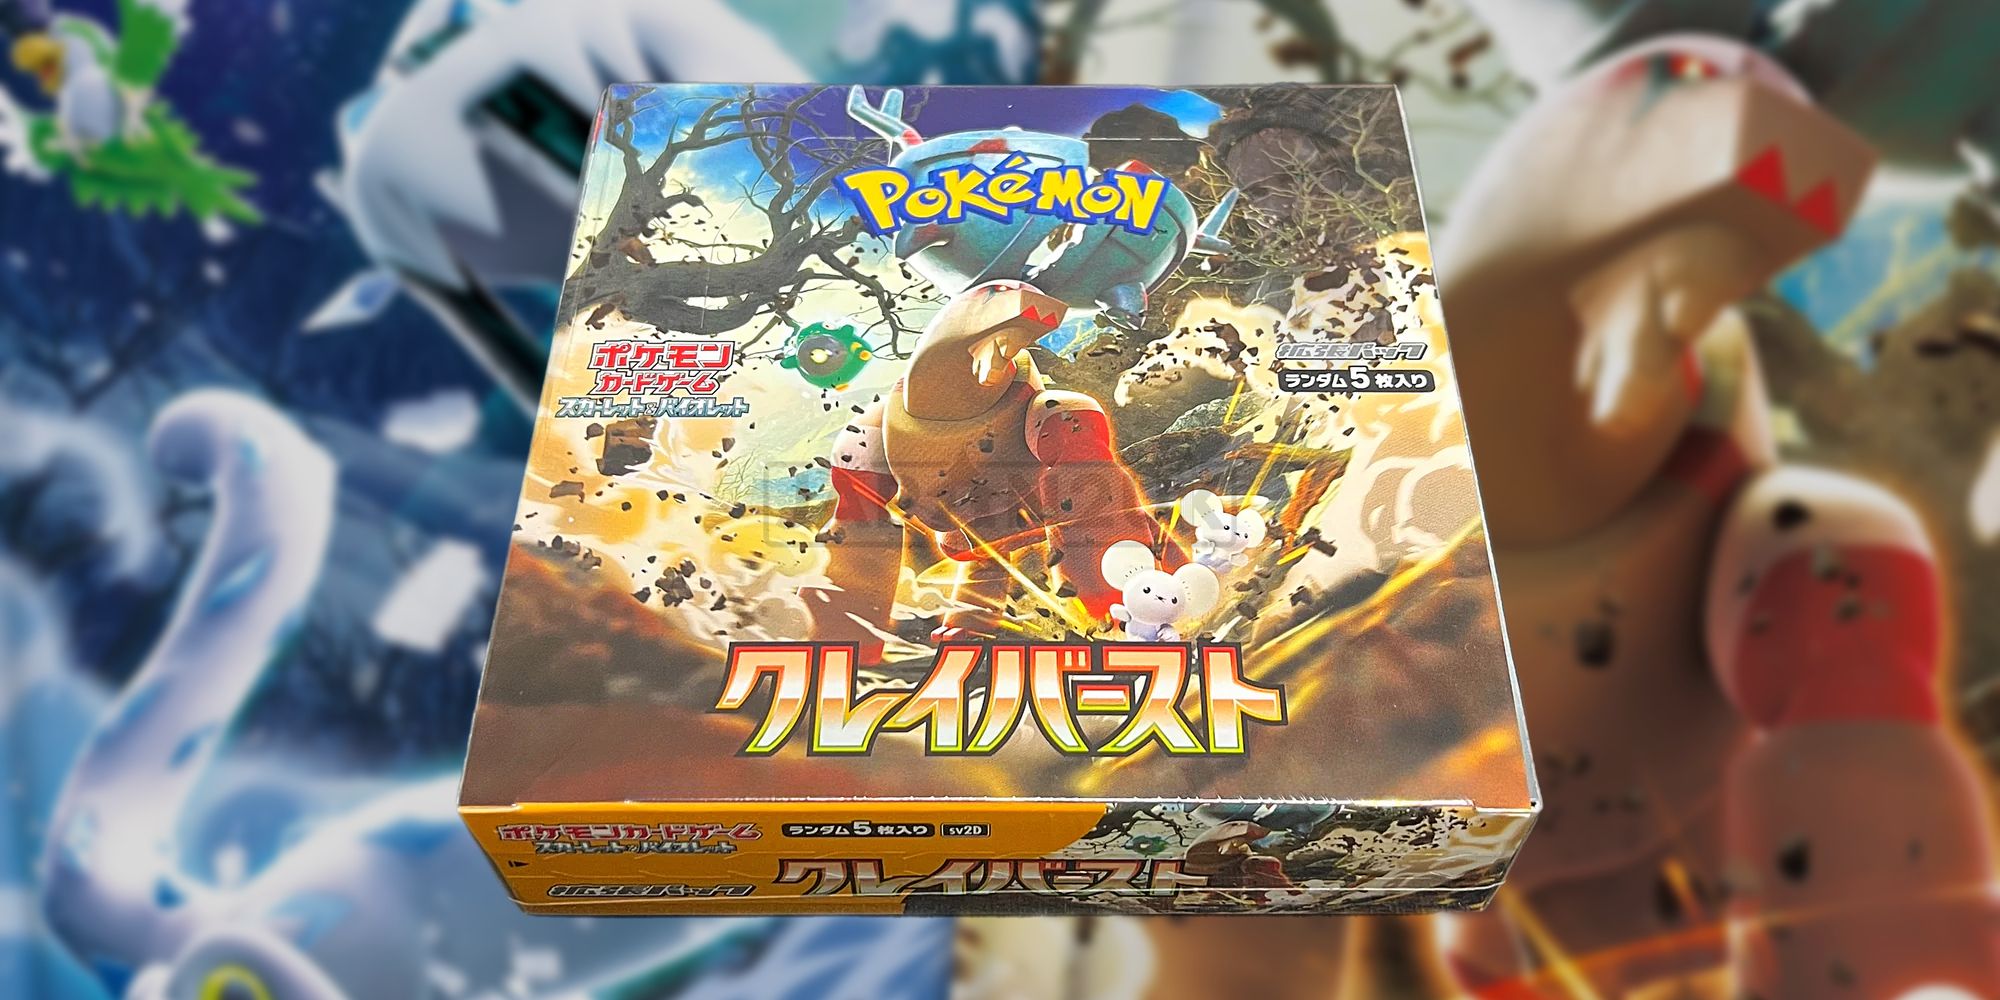 Made-To-Order Pokémon TCG Booster Boxes Coming Soon, But For A Limited Time